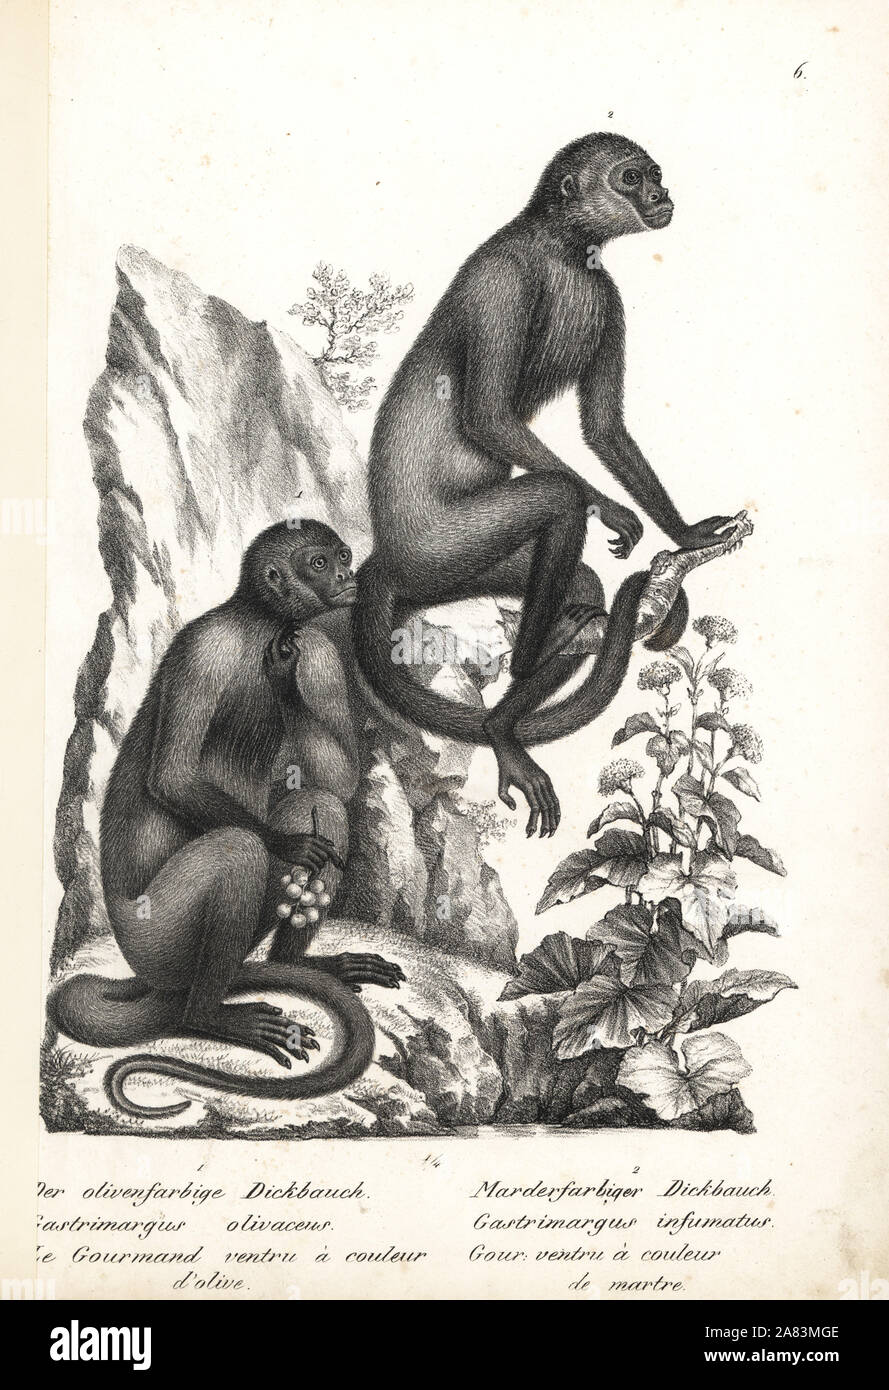 Geoffroy's woolly monkey, Lagothrix cana cana (Gastrimargus olivaceus), endangered, and woolly monkey, Lagothrix lagotricha (Gastrimargus infumatus), vulnerable. Lithograph by Karl Joseph Brodtmann from Heinrich Rudolf Schinz's Illustrated Natural History of Animals, Zurich, 1827. Stock Photo